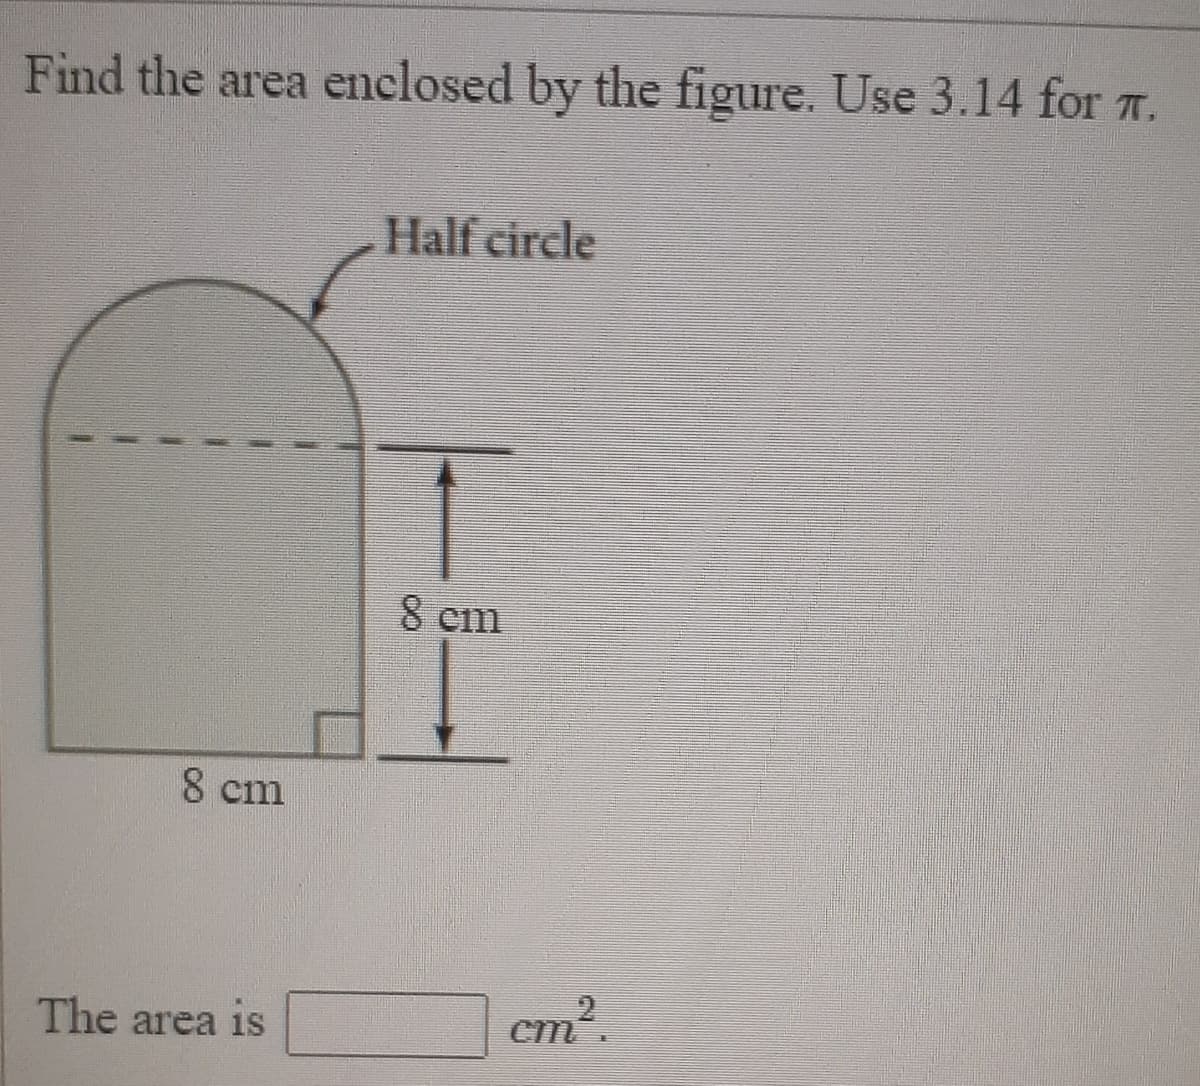 Find the area enclosed by the figure. Use 3.14 for T.
Half circle
8 cm
8 cm
The area is
cm2.
